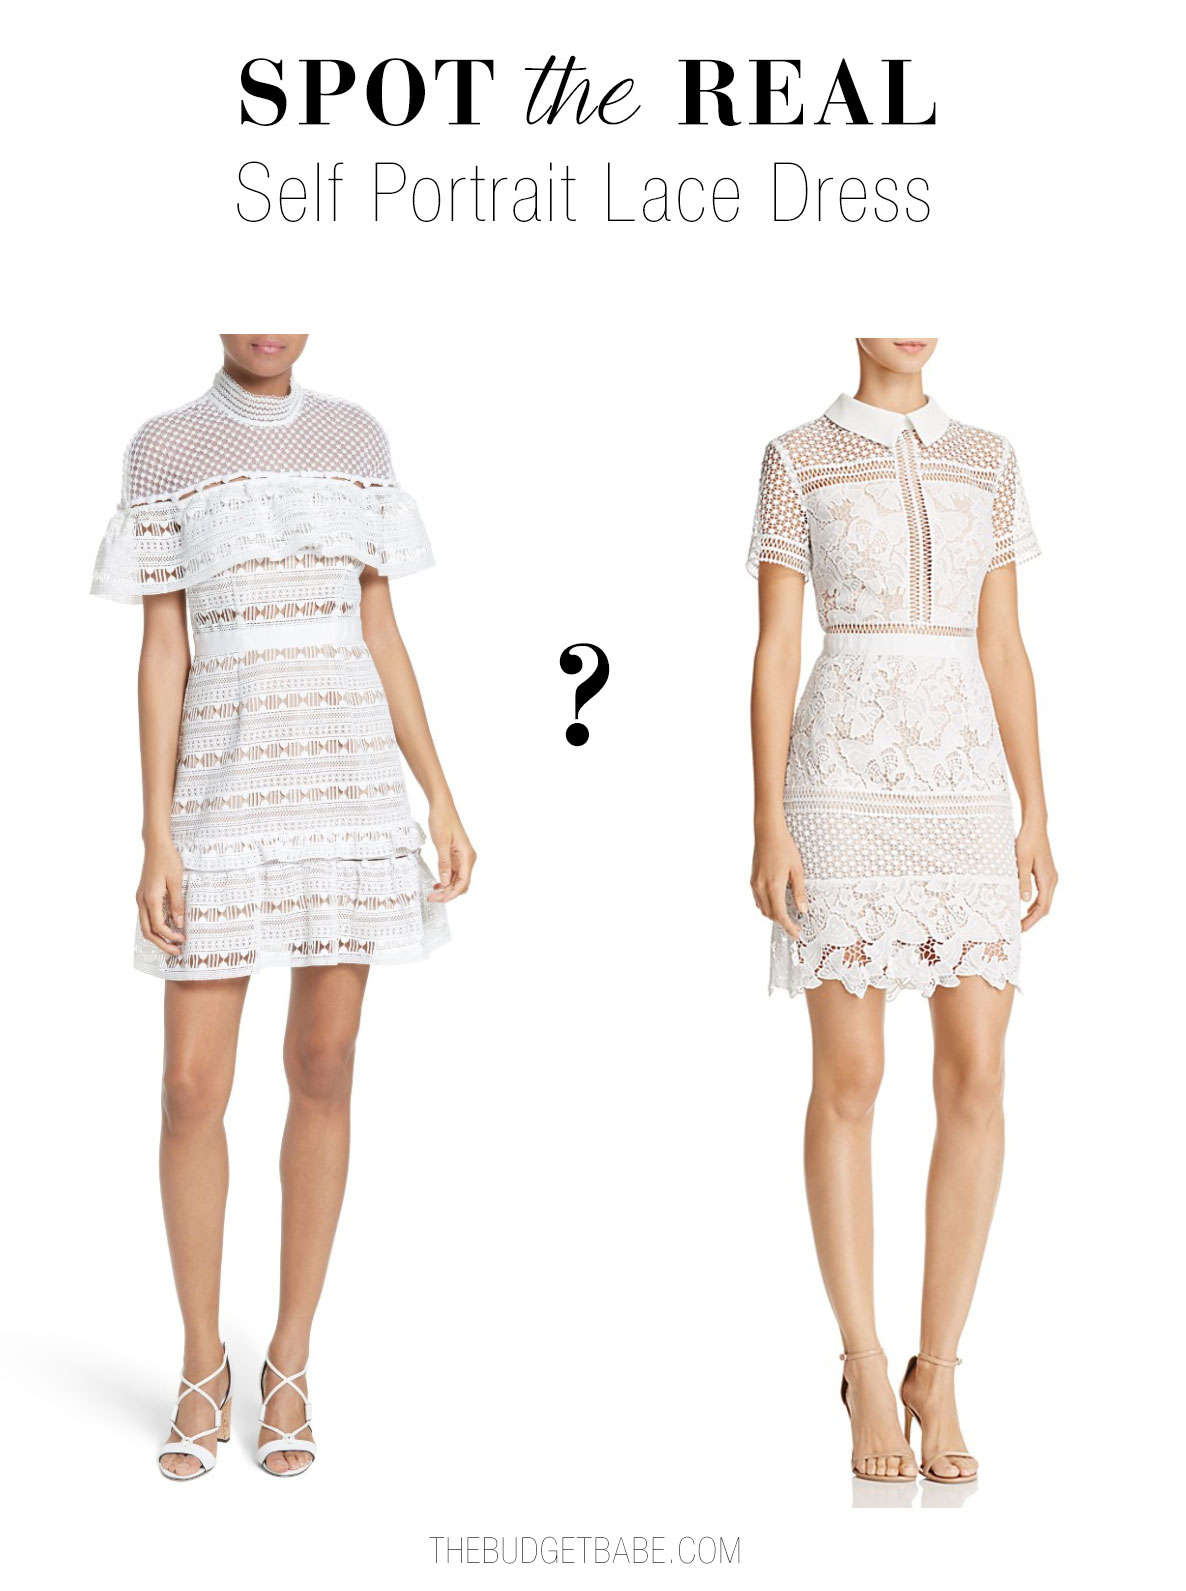 Can you guess which is the real Self Portrait lace dress?